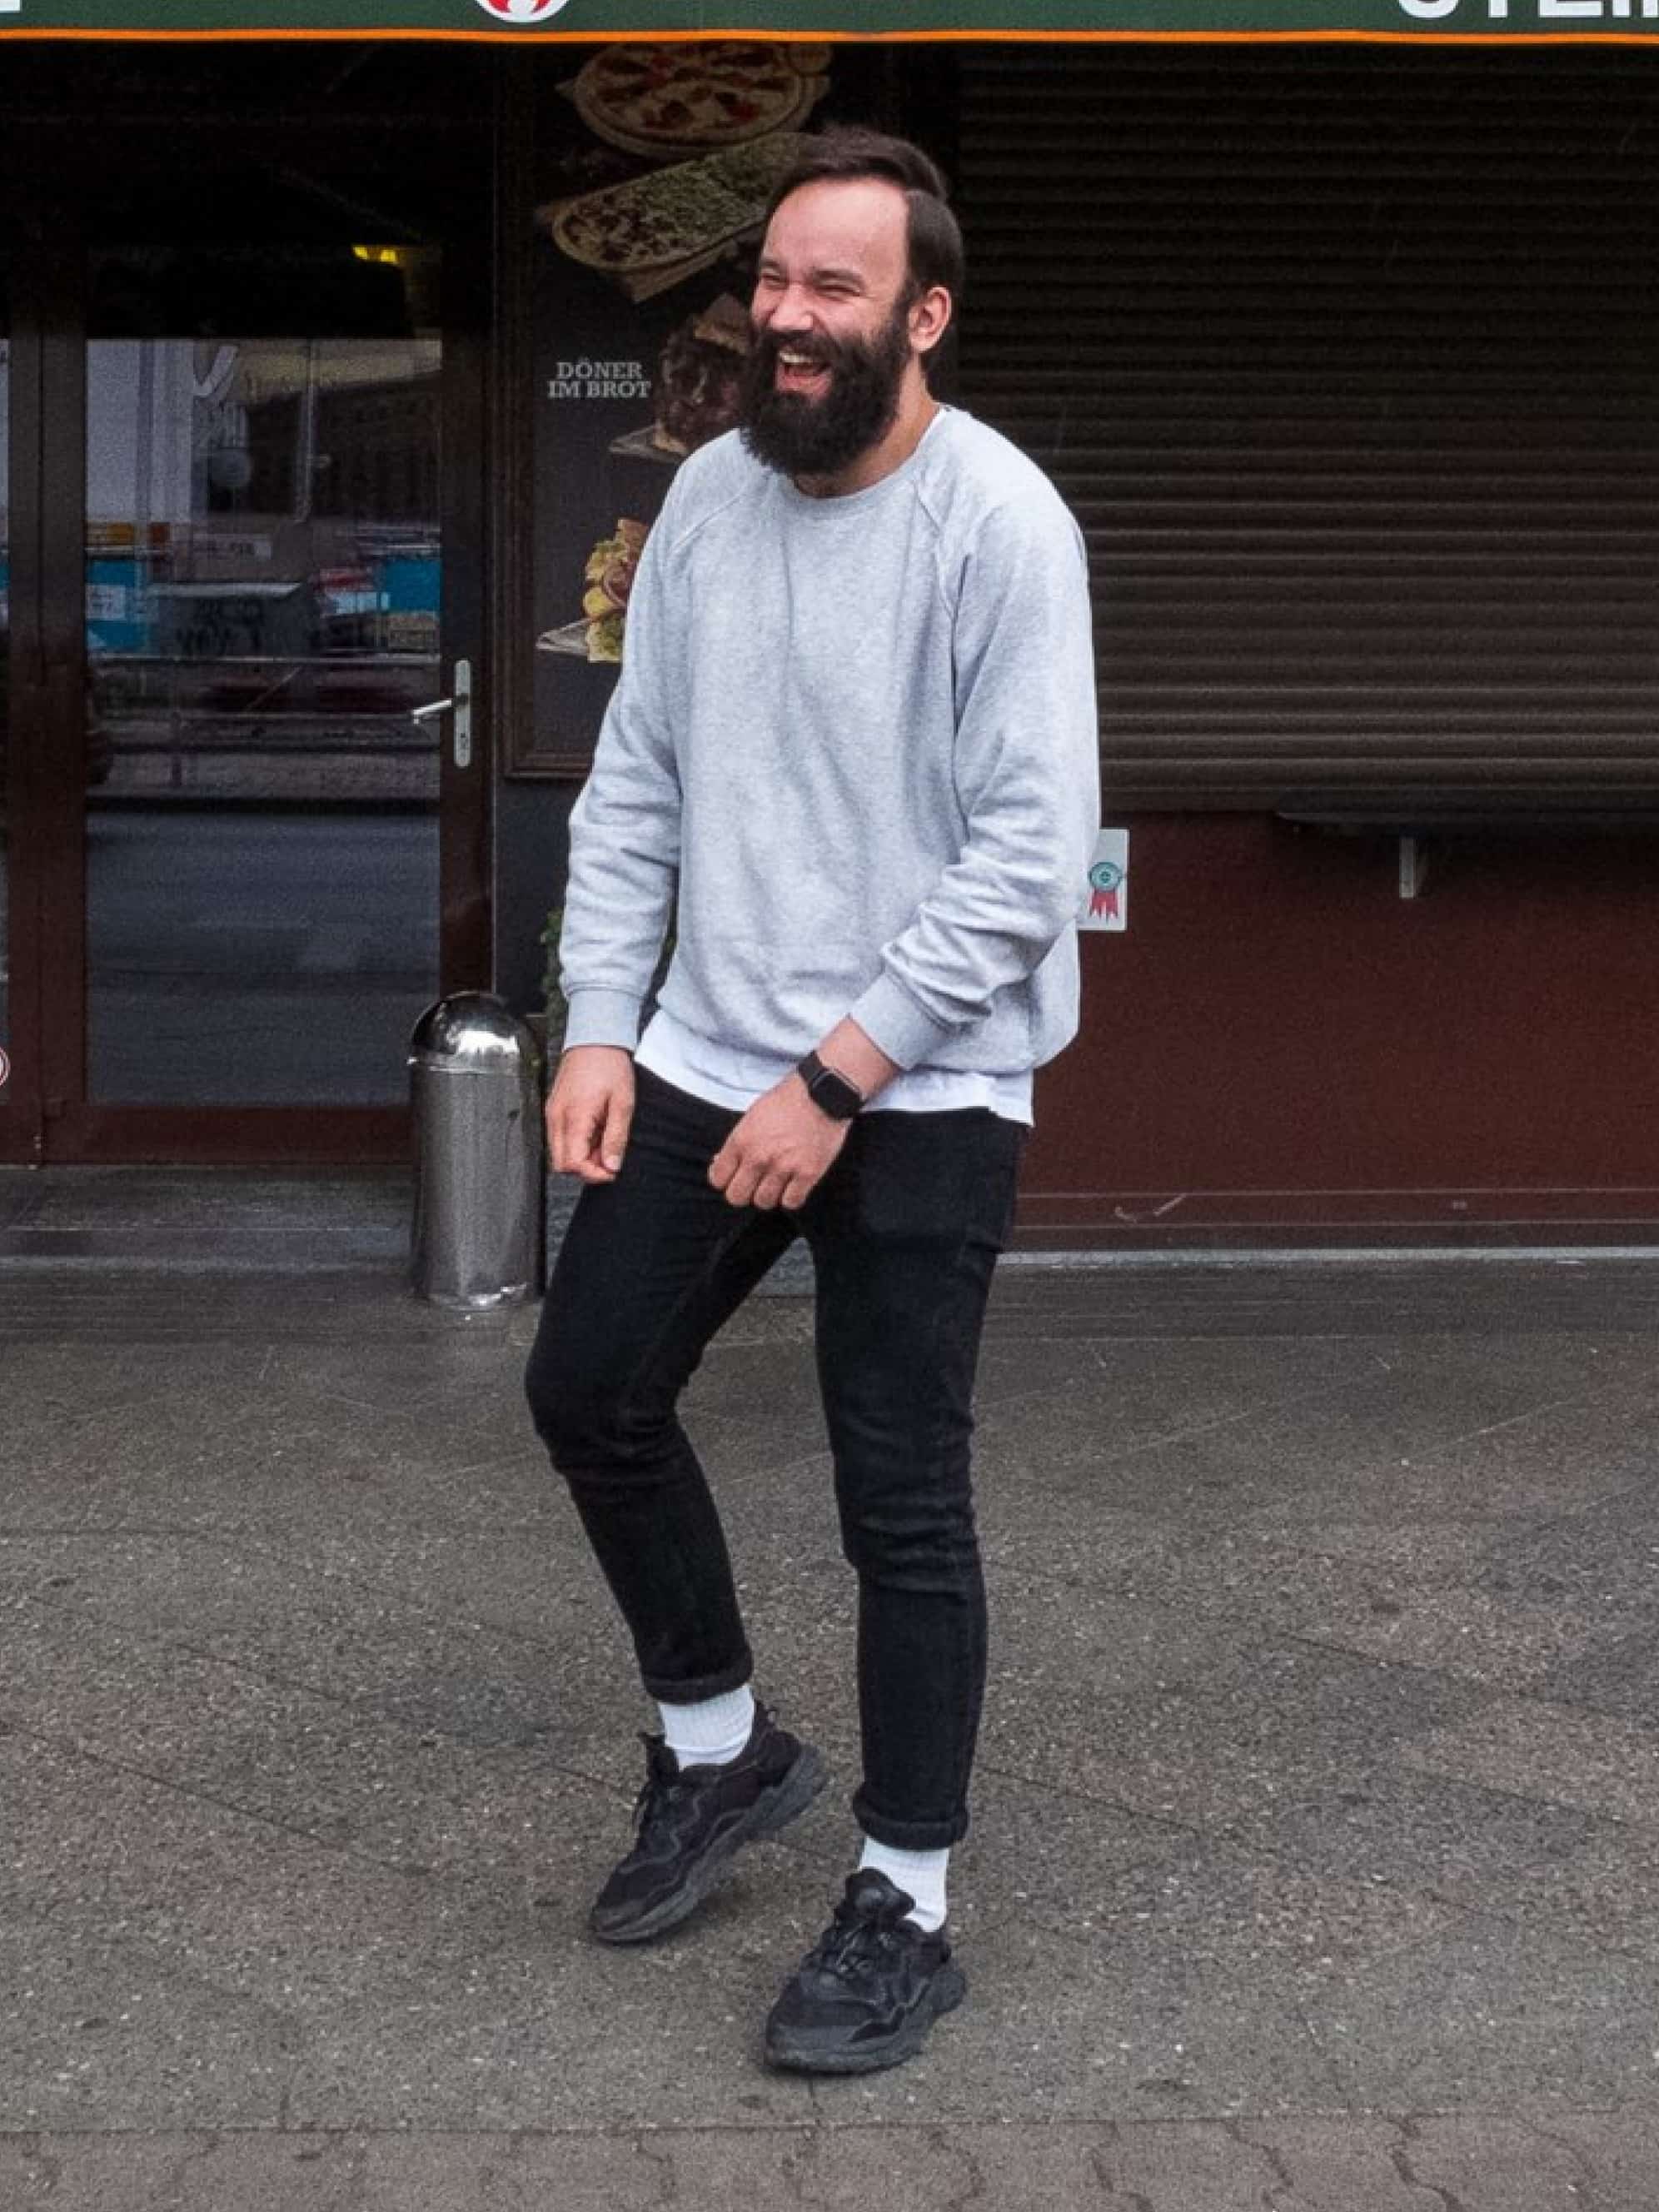 A man in a gray sweater stands on the sidewalk in front of a store and laughs.